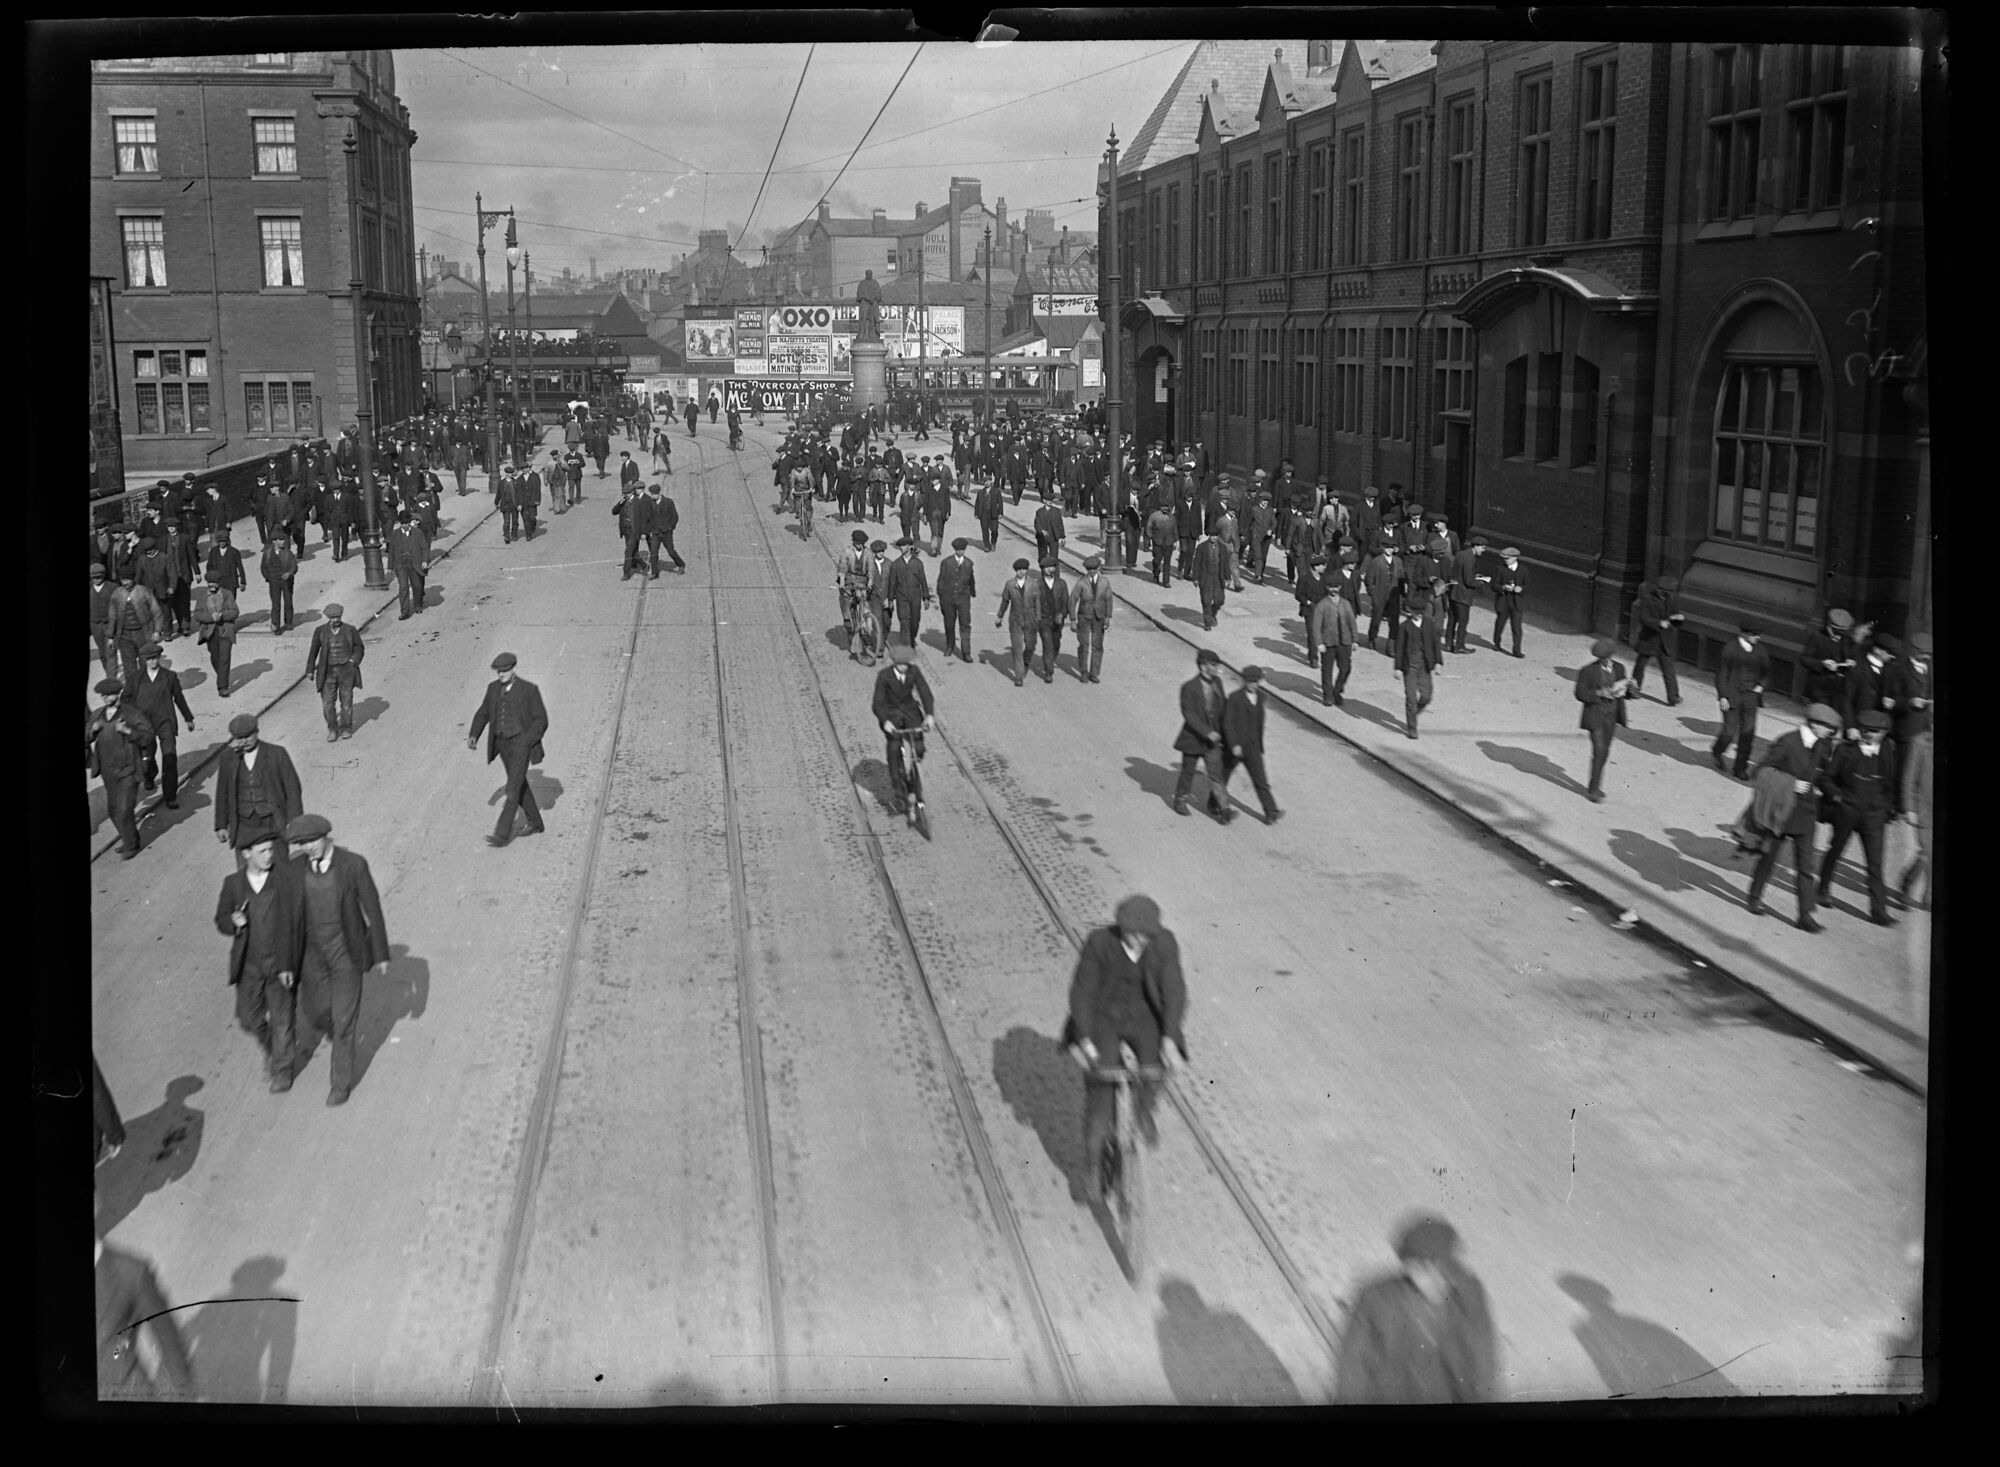 Workers heading to the shipyard, Barrow-in-Furness